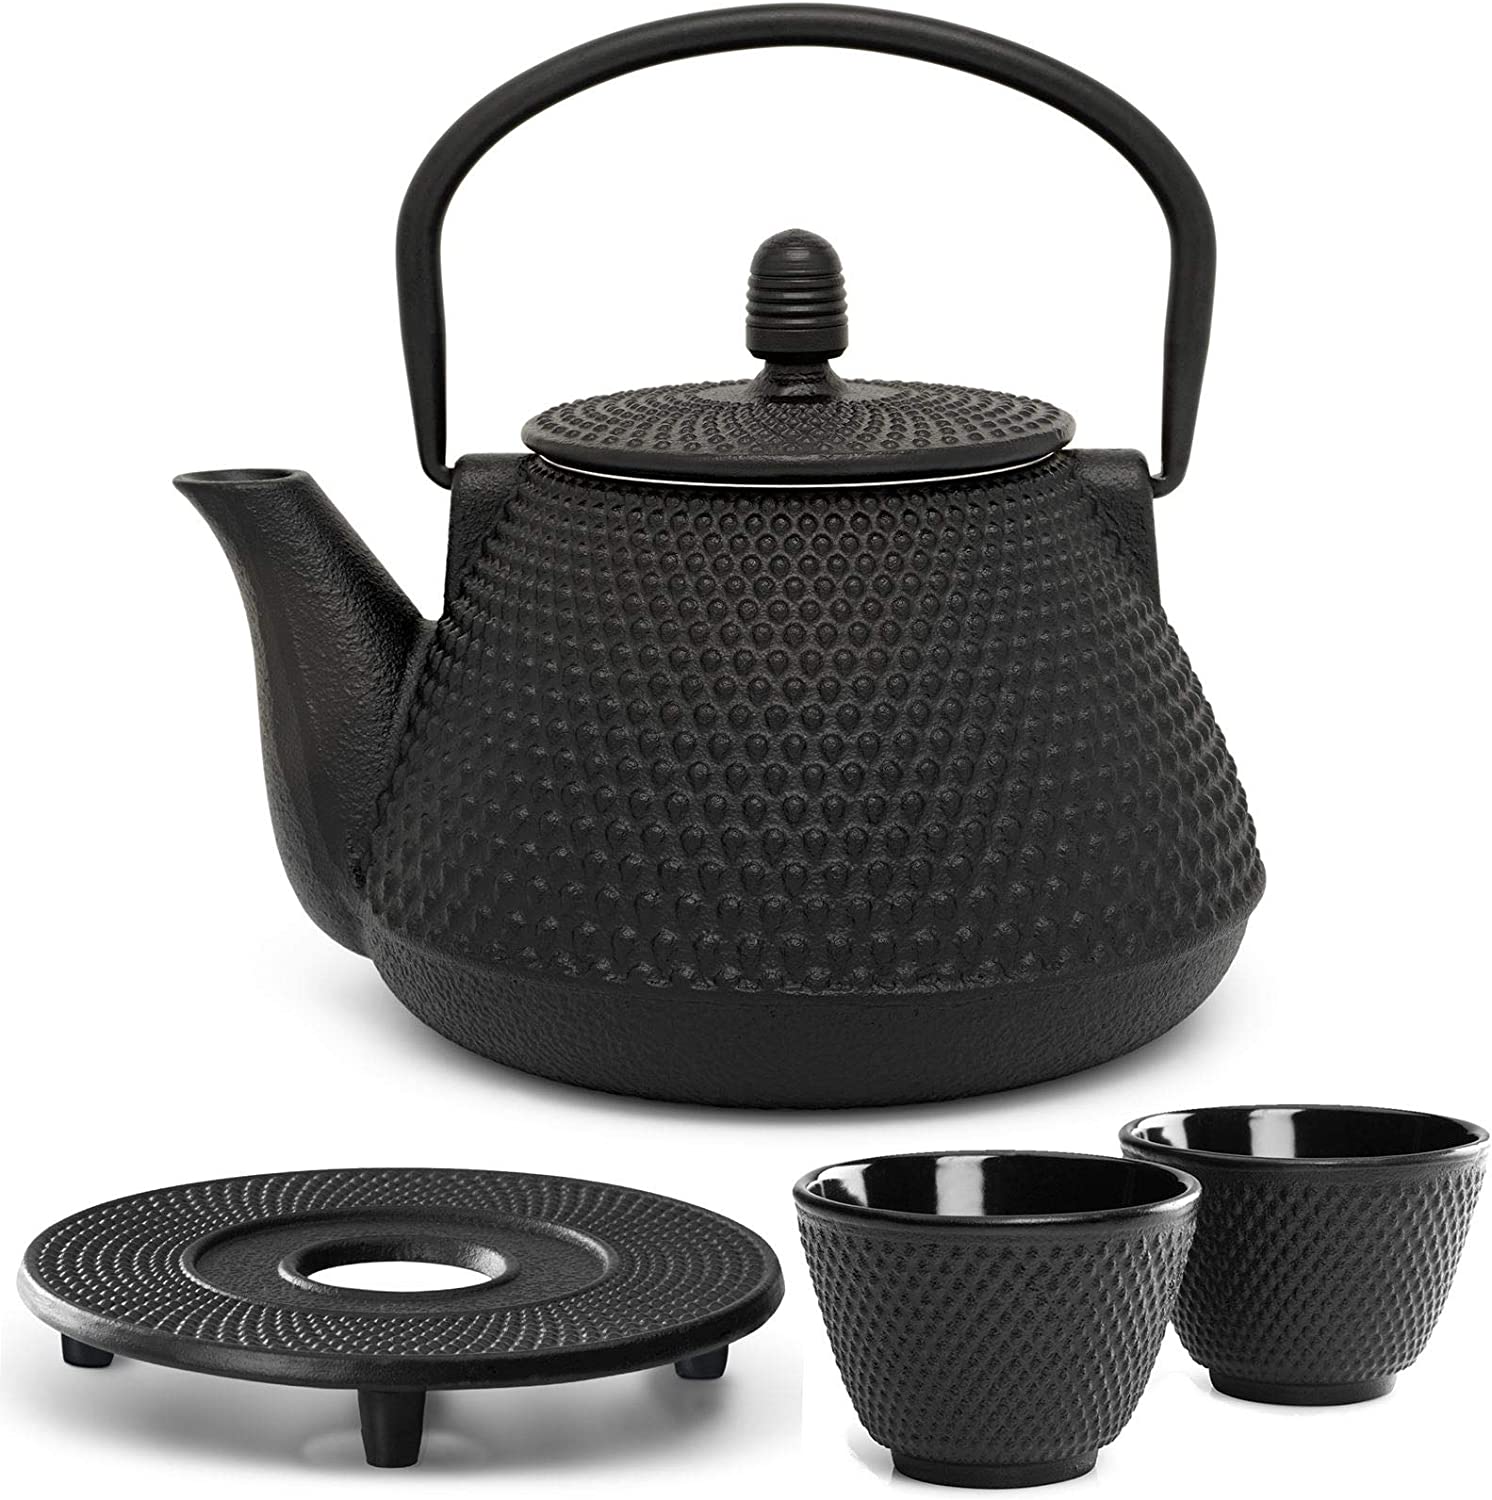 Bredemeijer Teapot Asian Cast Iron Set 1.0 Litres - Black Cast Iron Can with Strainer Insert for Loose Tea & 2 Tea Cups (Cups) & Saucers